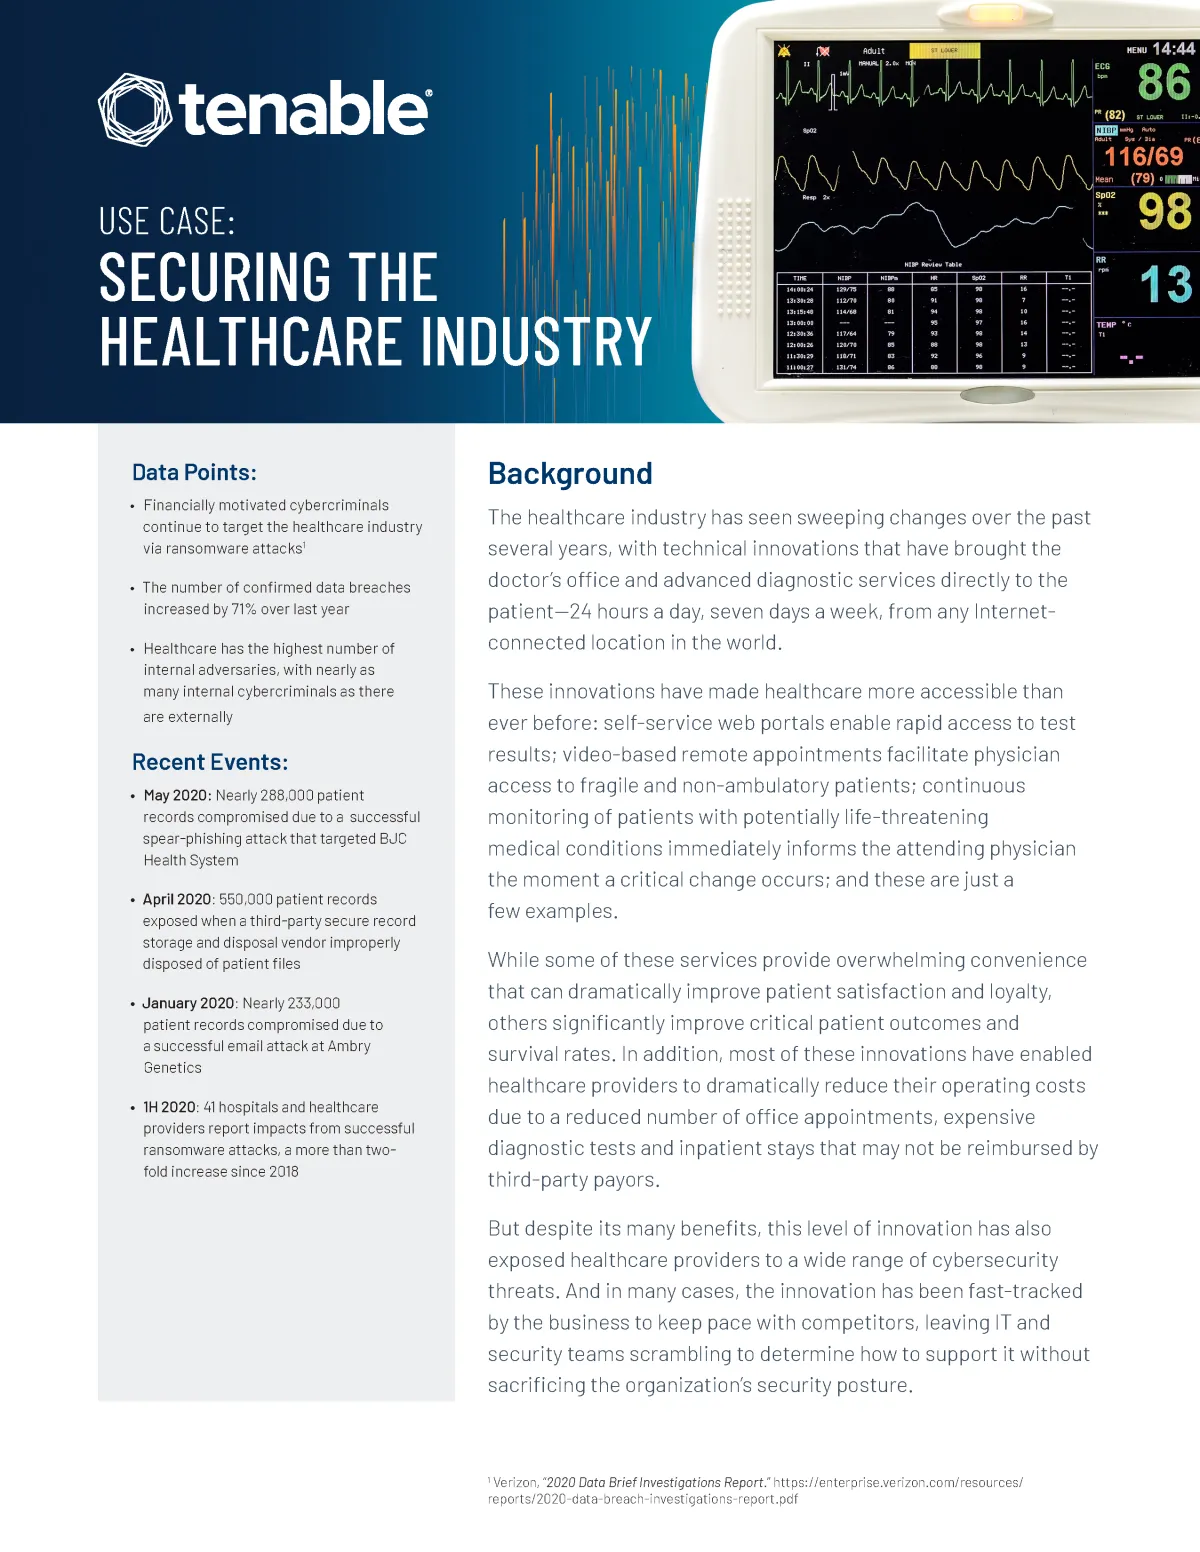 Use Case: Risk-Based VM - Securing The Healthcare Industry